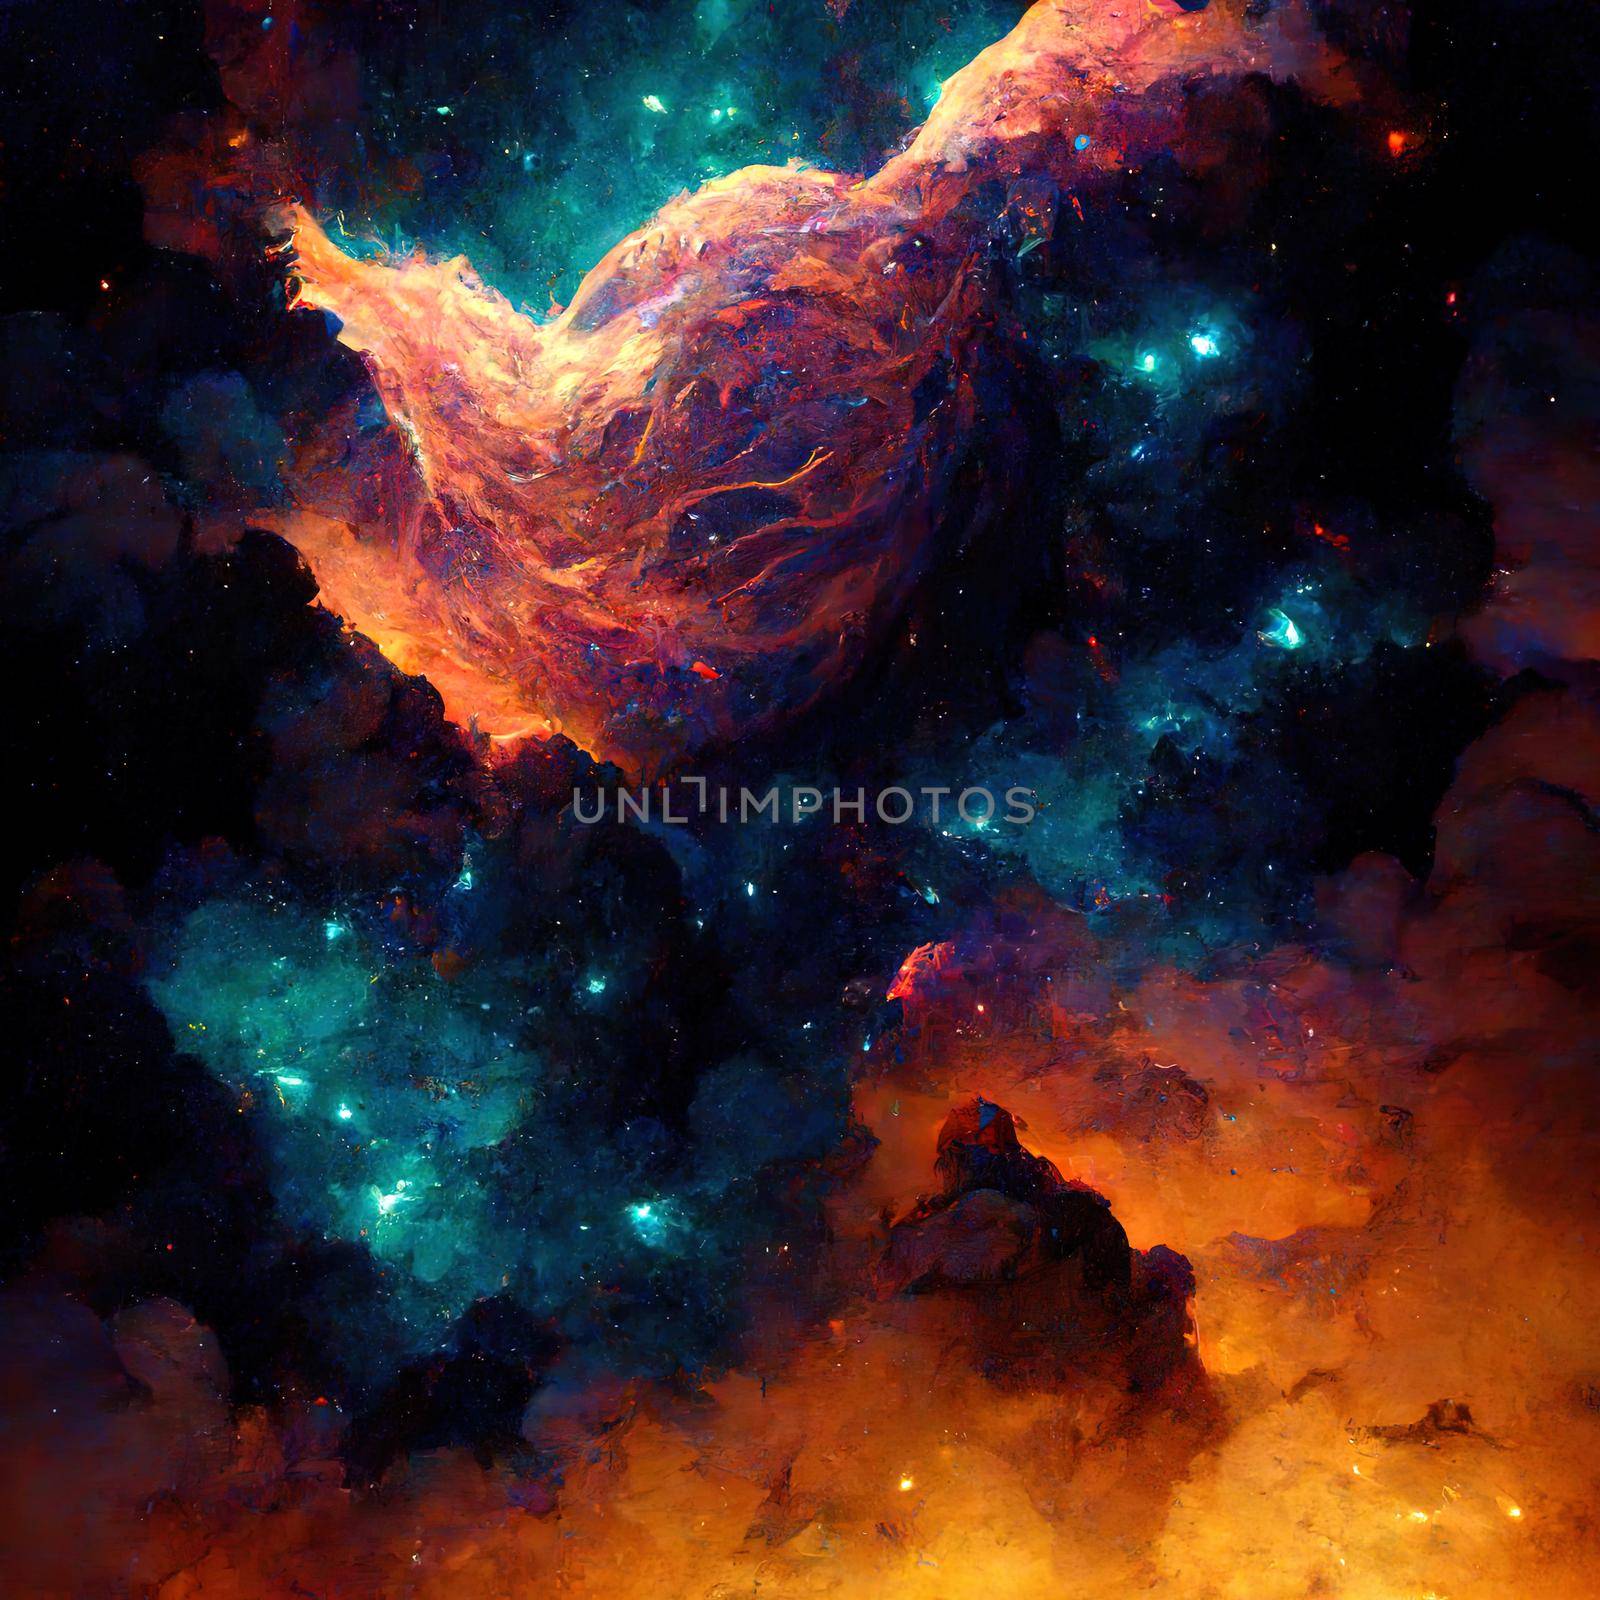 Space and glowing nebula background. High quality 3d illustration